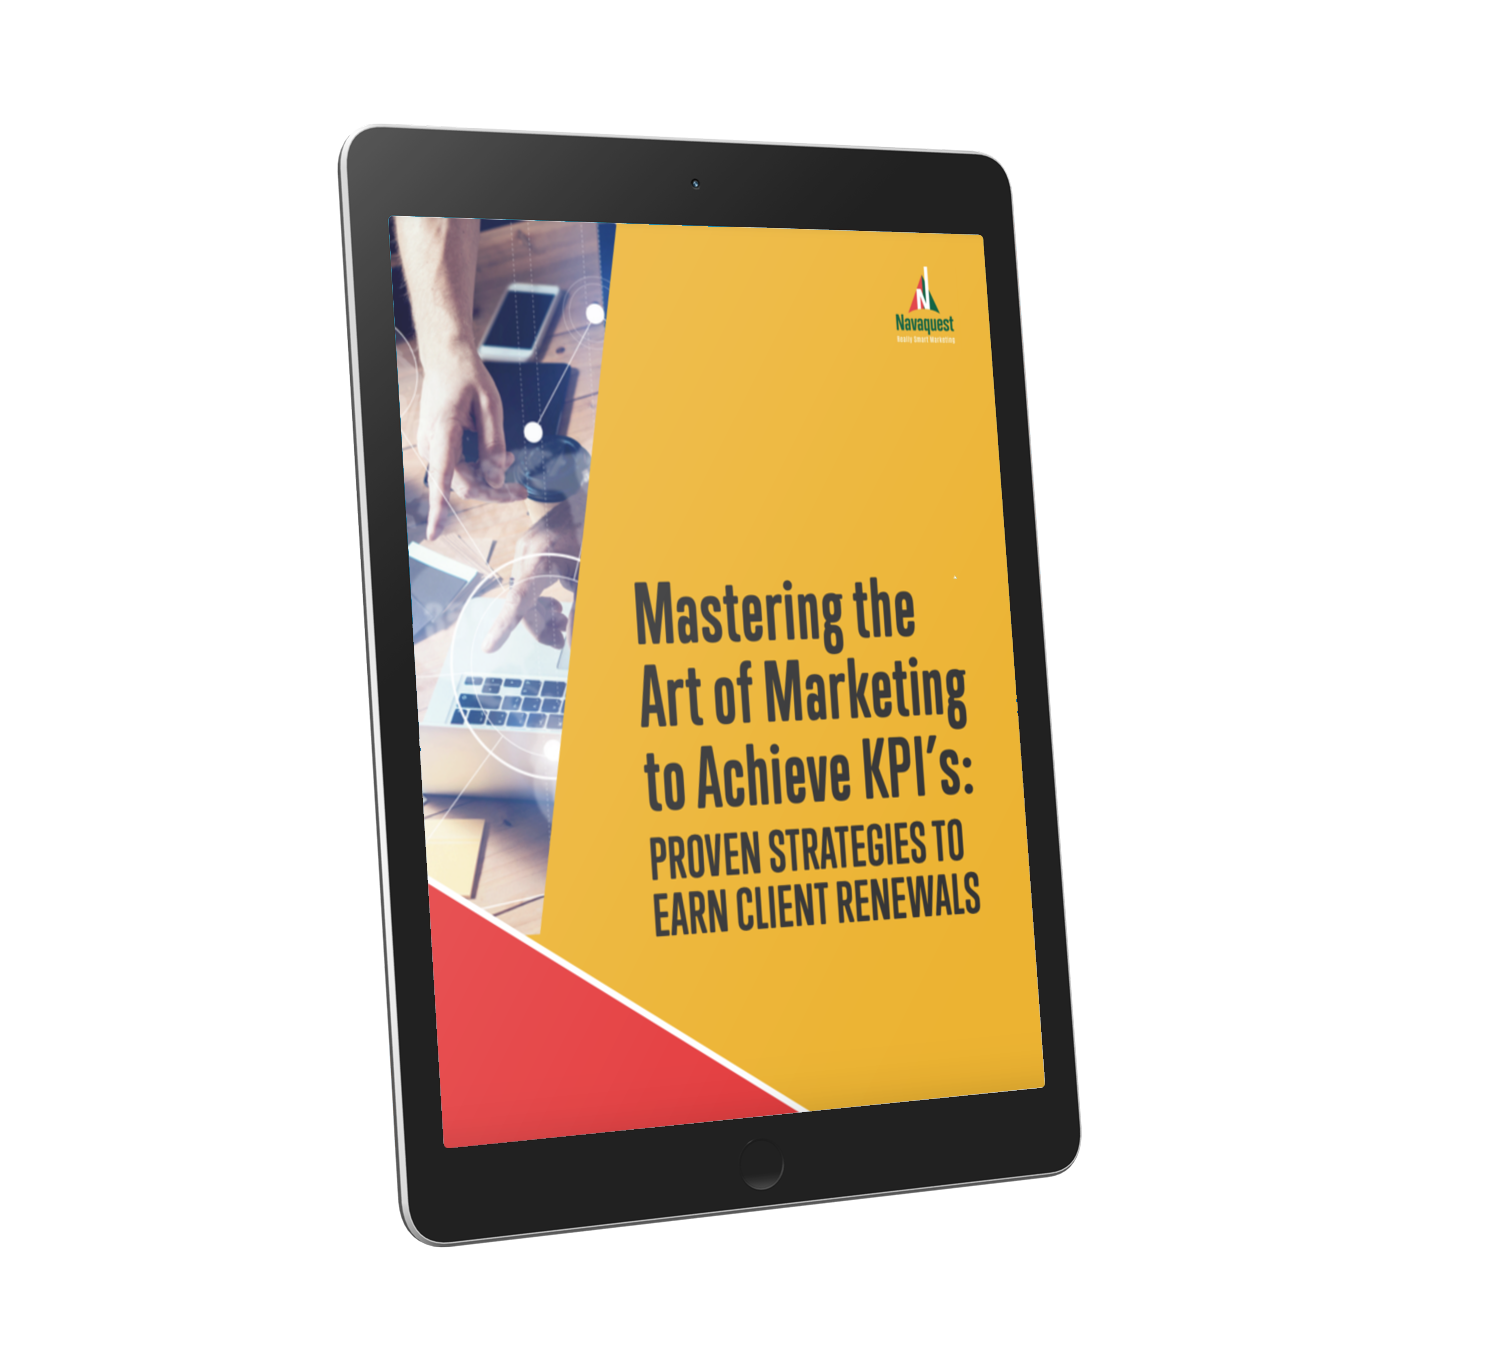 Mastering the Art of Marketing to Achieve KPI’s: Proven Strategies to Earn Client Renewals